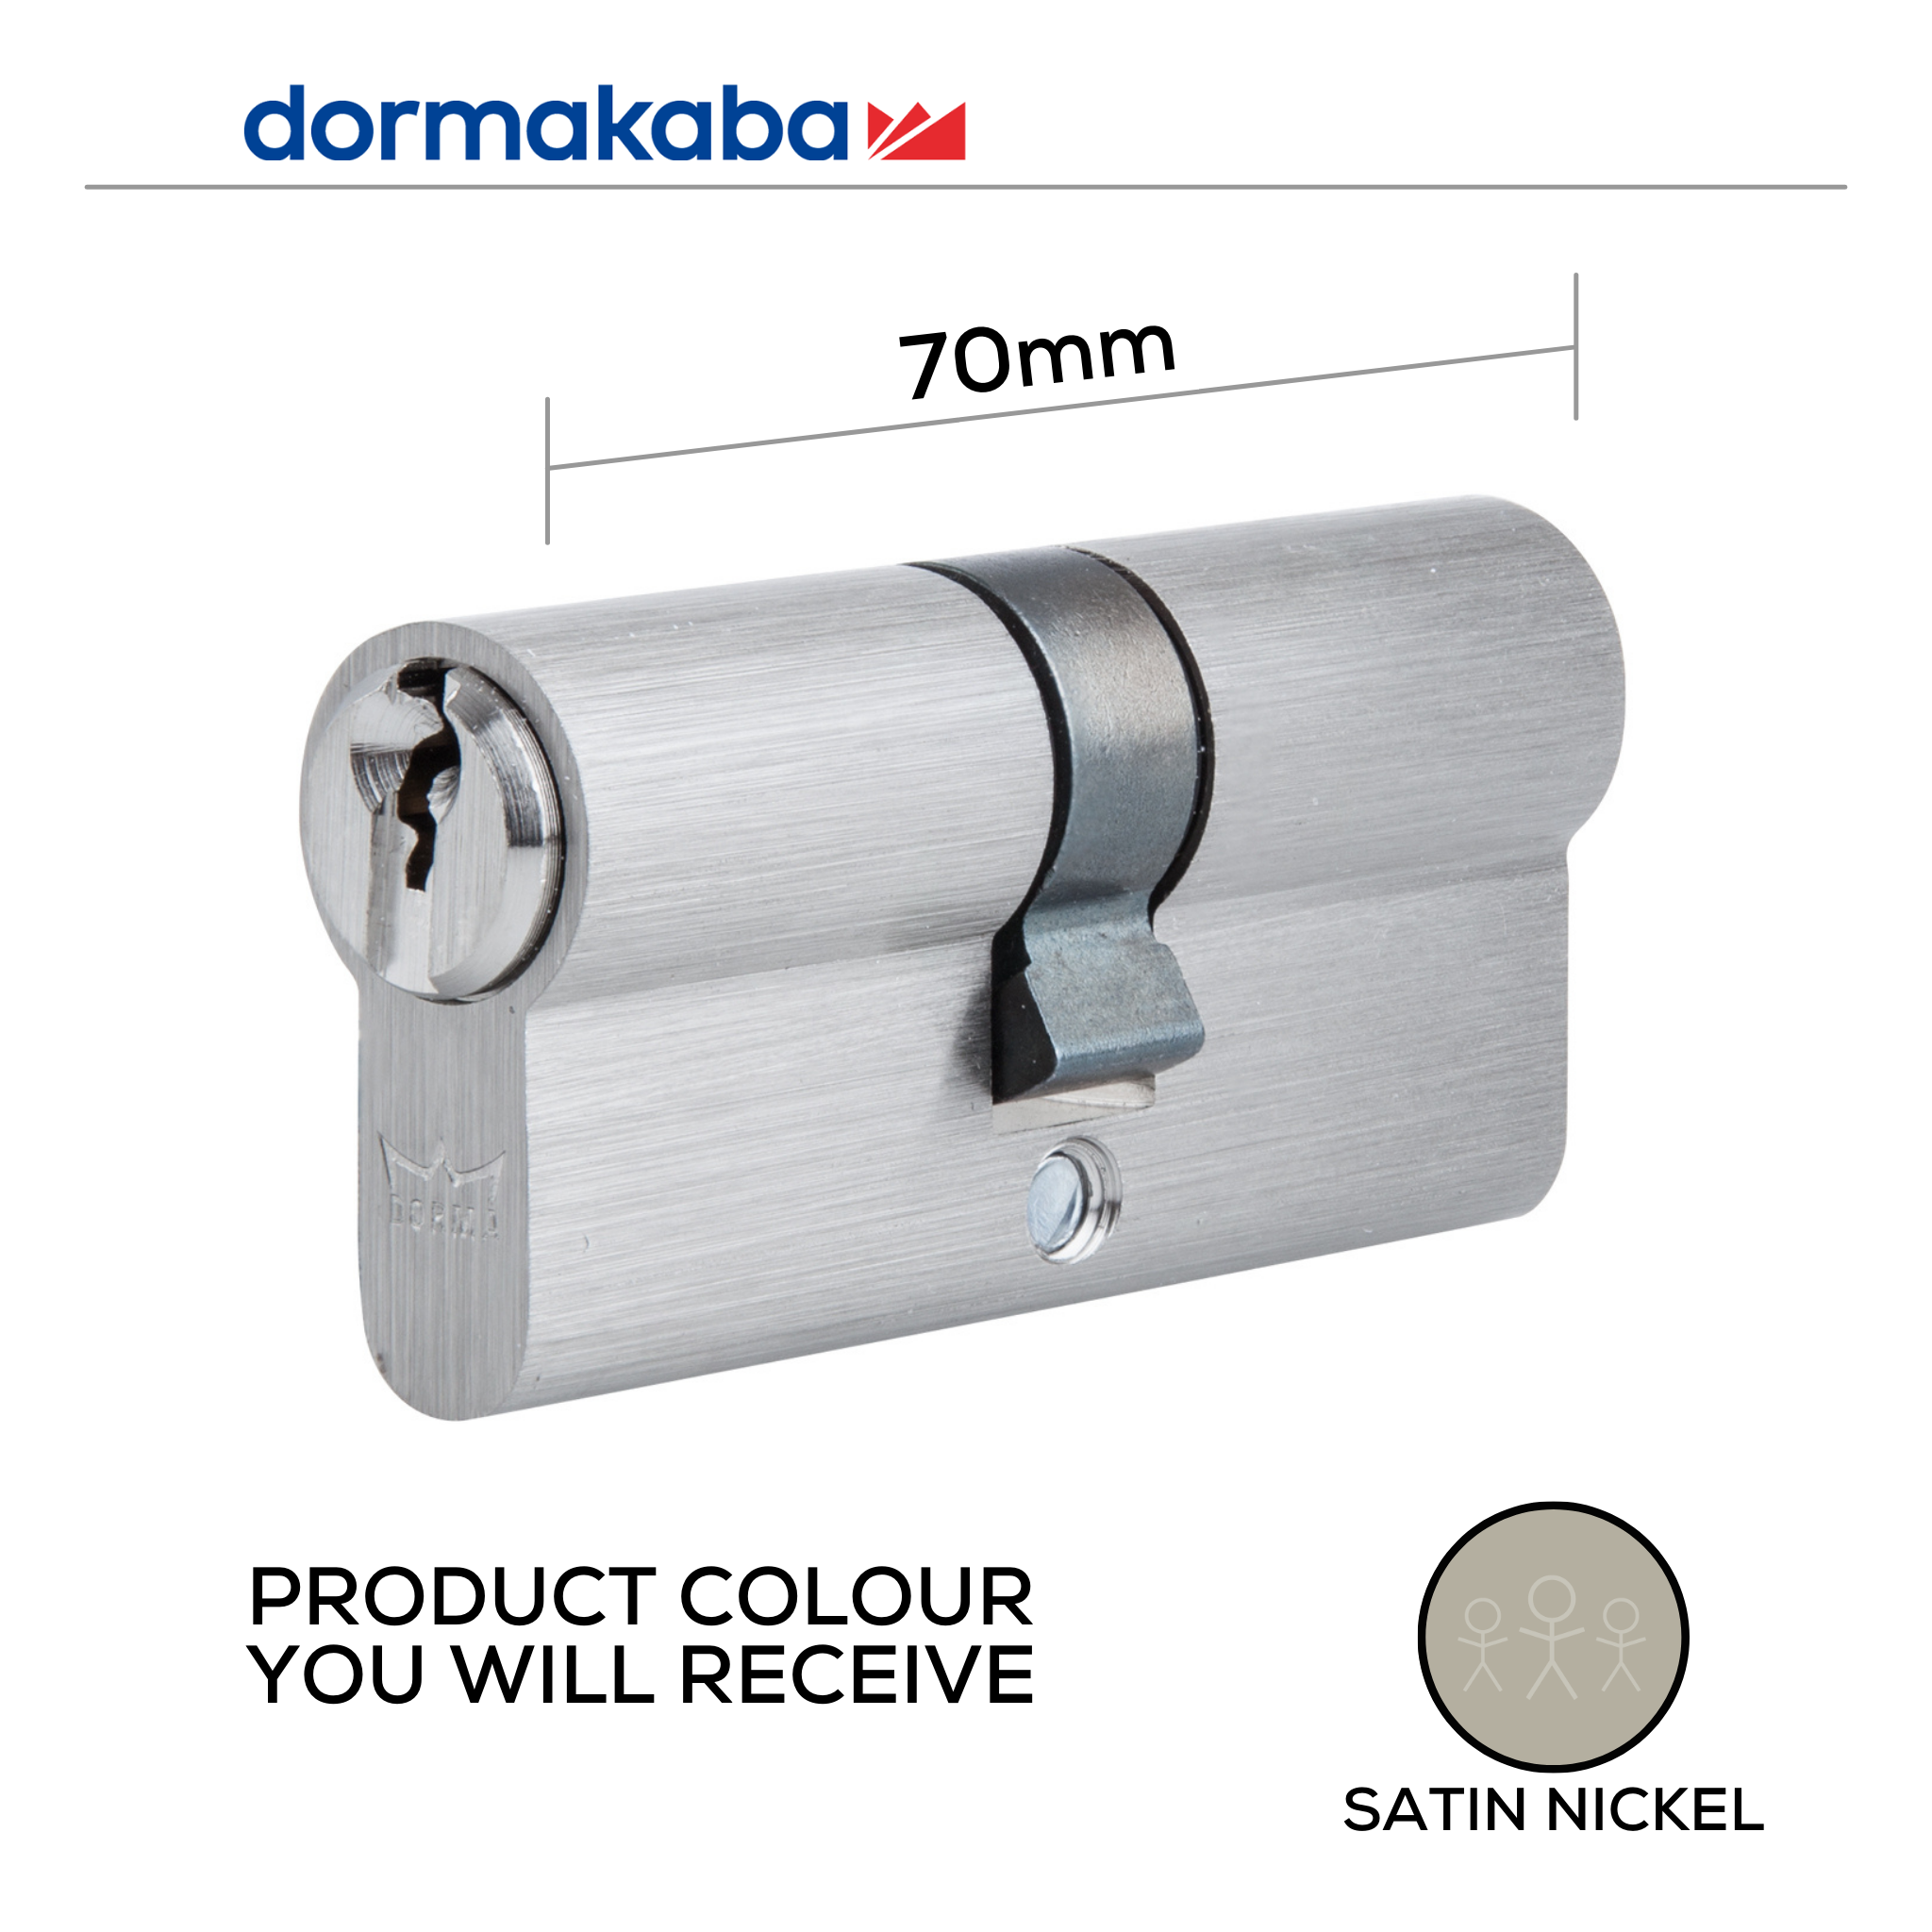 DDC057001 KD, 70mm (l), Double, Cylinder, Key to Key, Keyed Different, 5 Pin, Satin Nickel, DORMAKABA